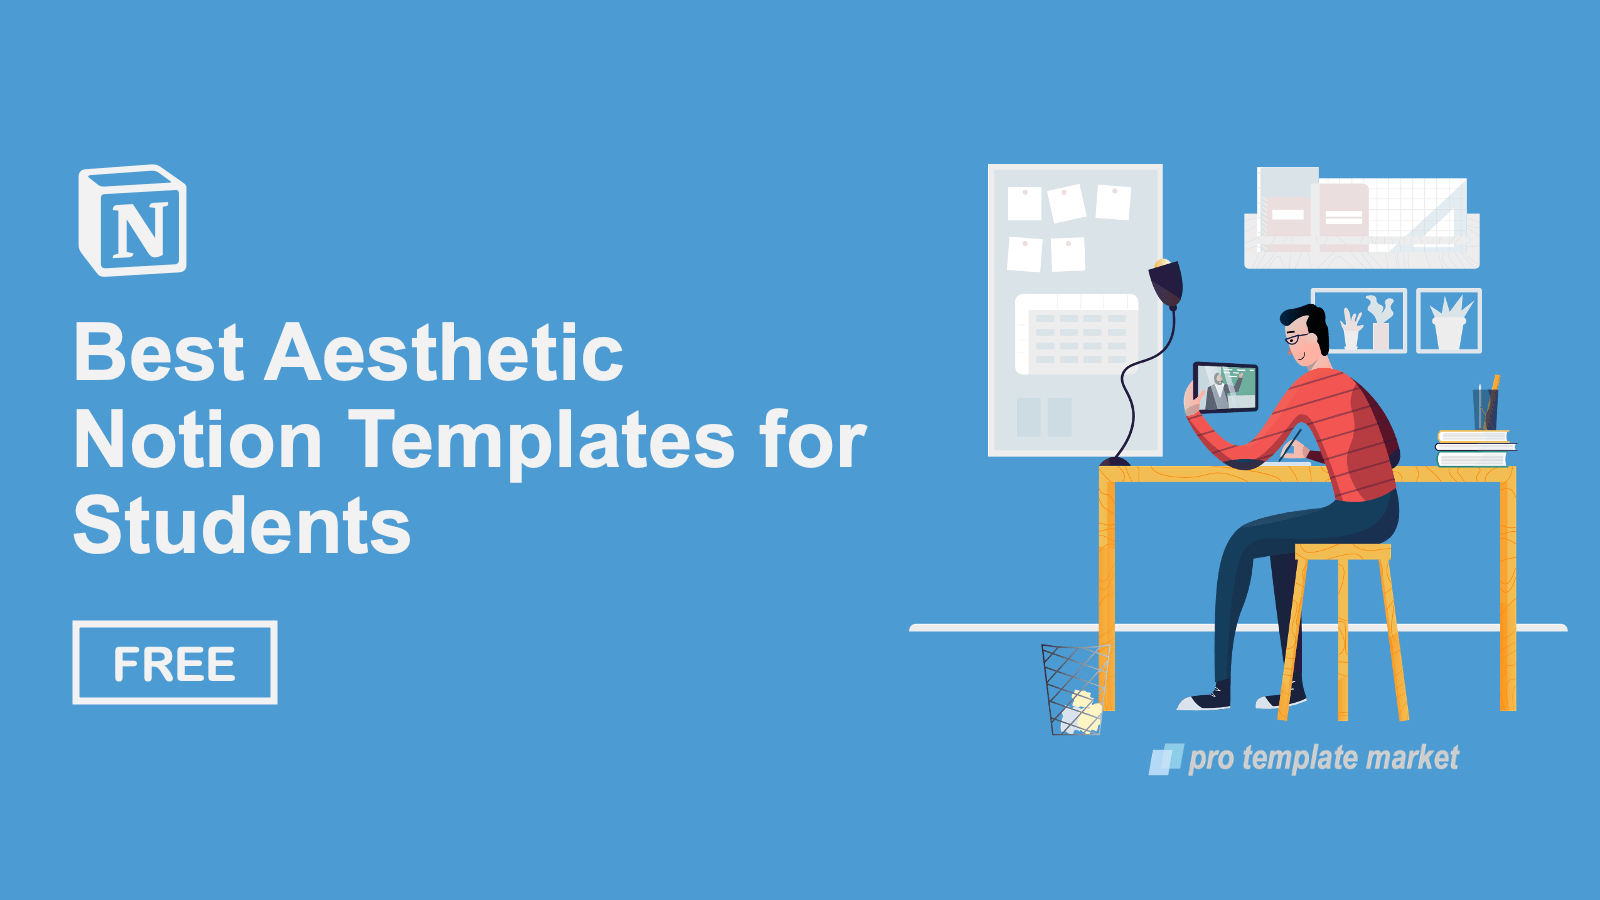 Best Aesthetic Notion Templates for Students